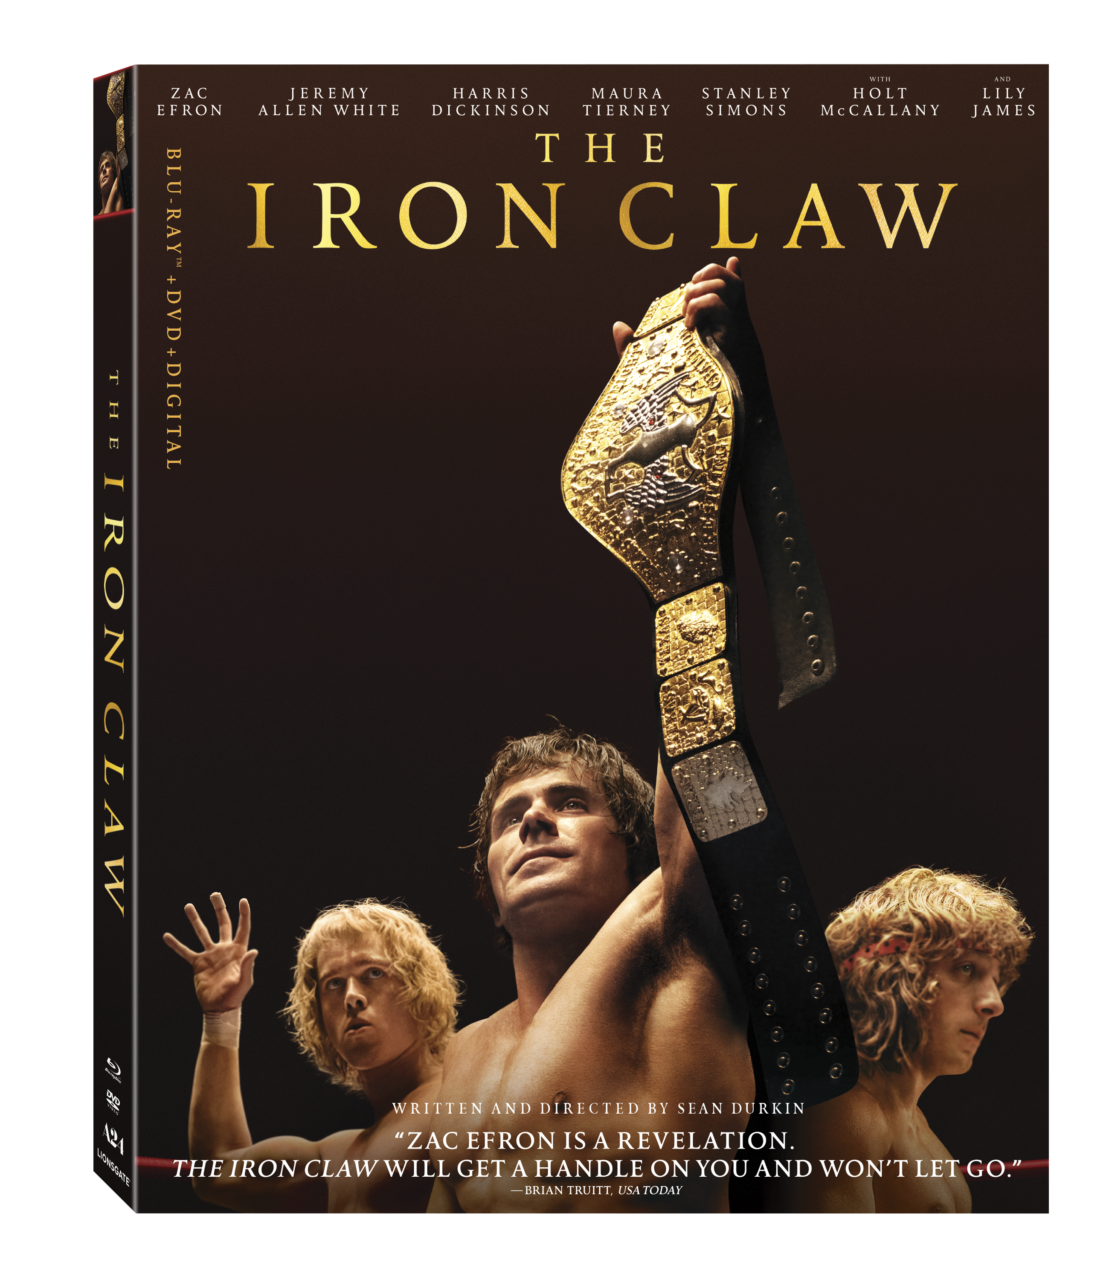 The Iron Claw Blu-Ray Combo Pack cover (Lionsgate)